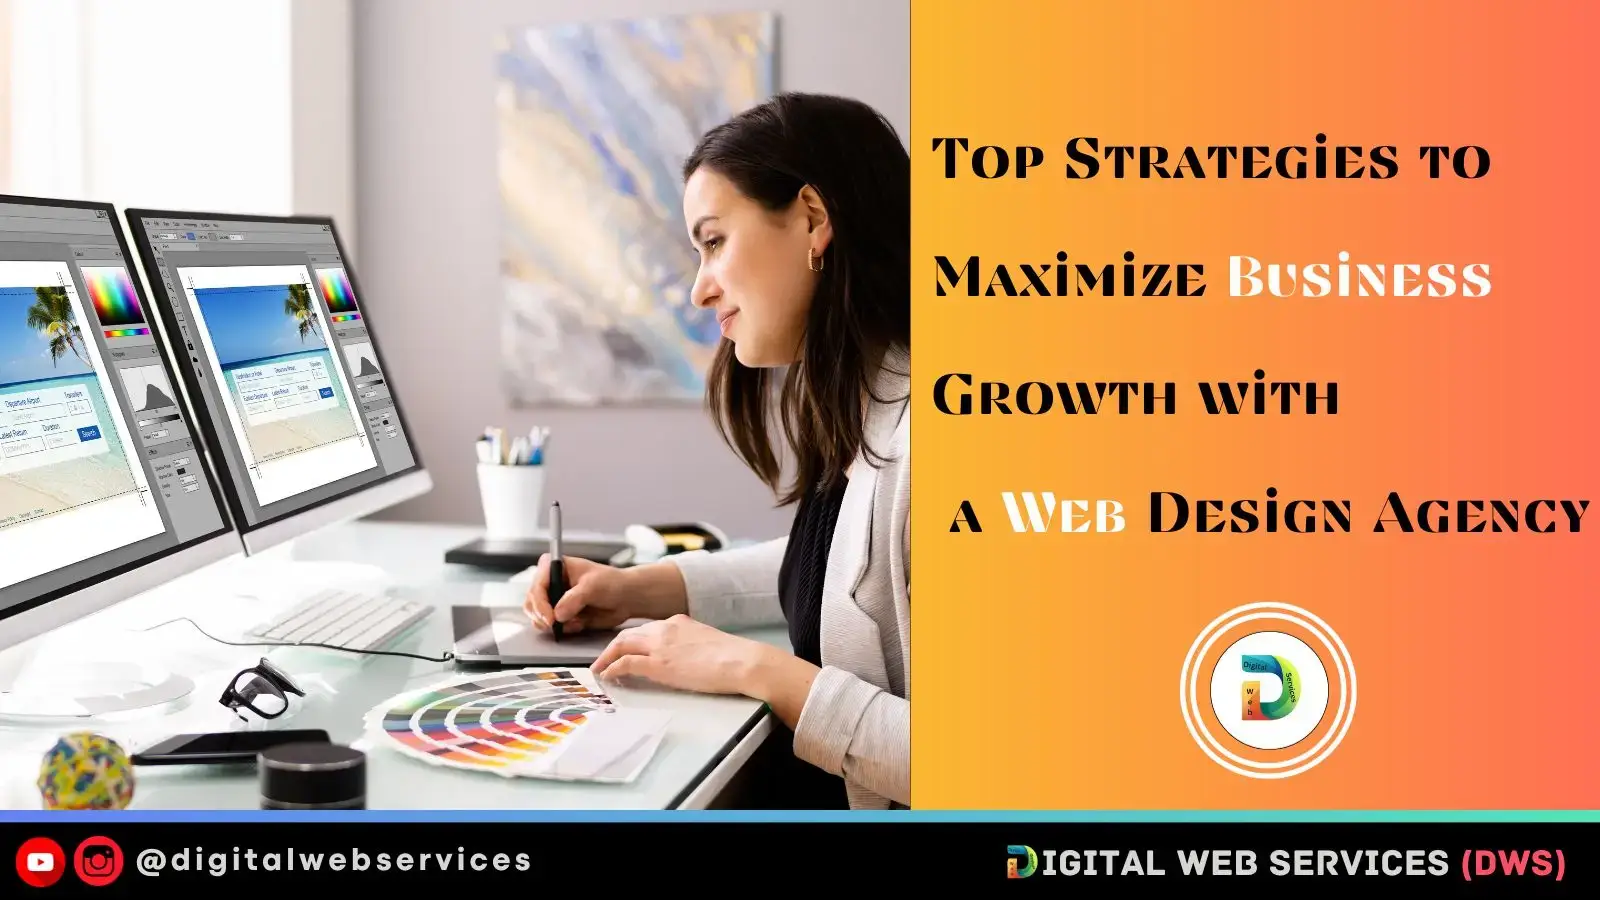 Top Strategies to Maximize Business Growth with a Web Design Agency